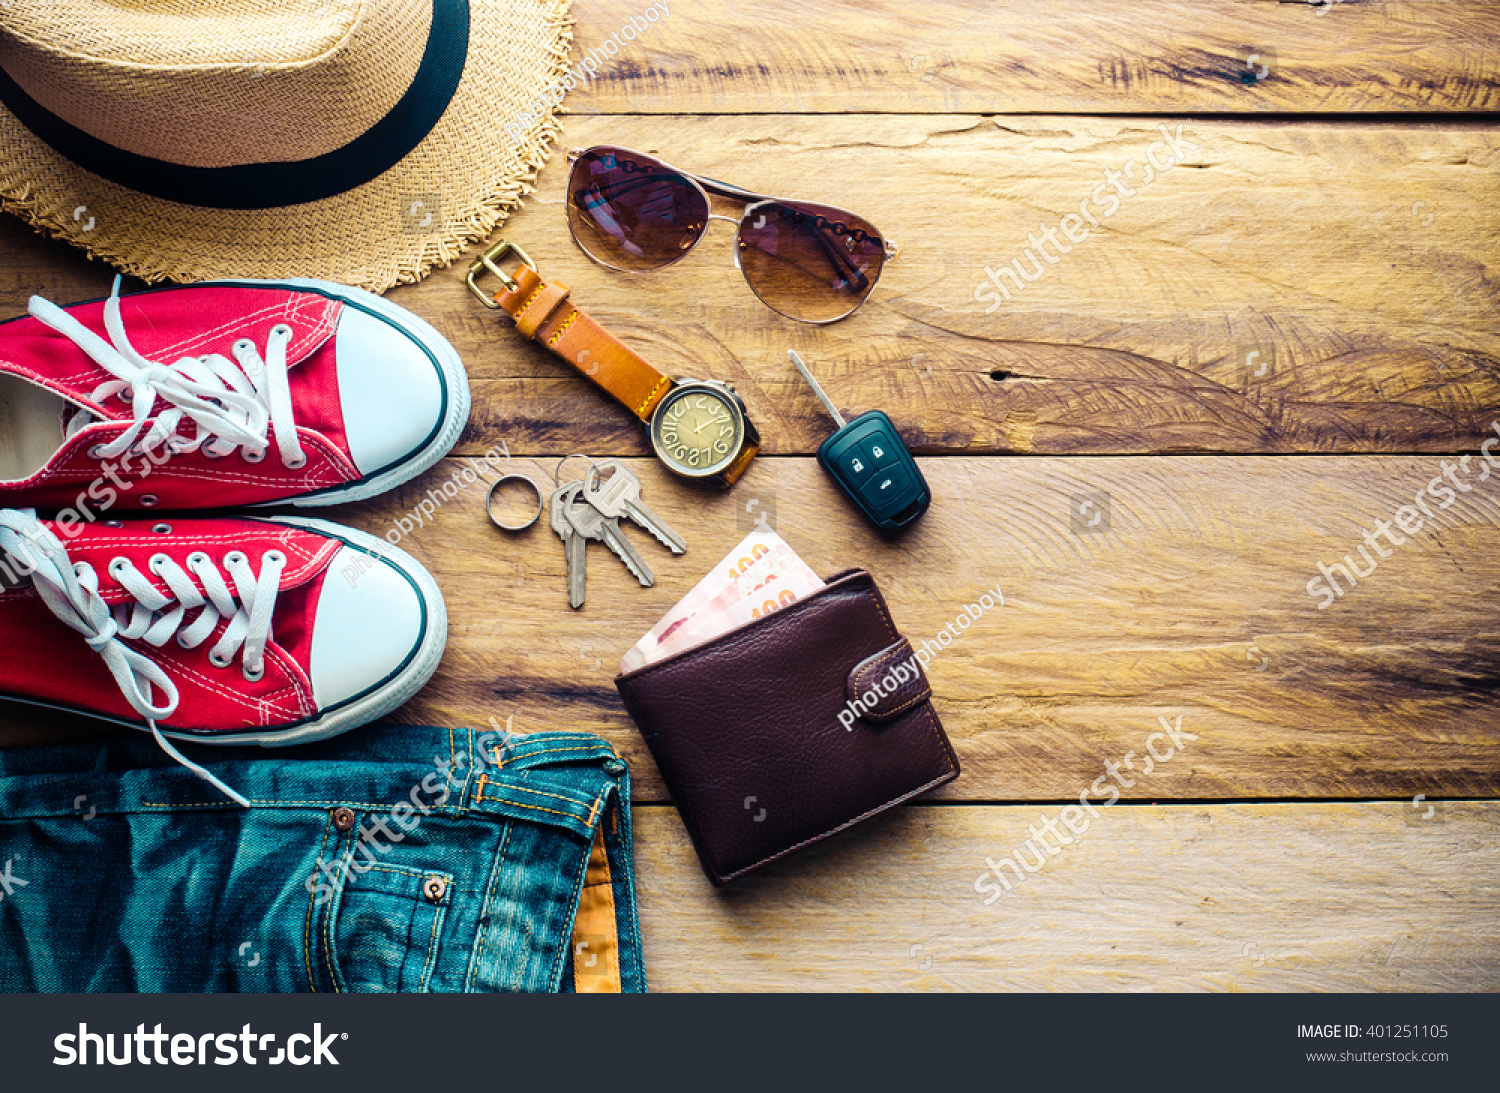 Travel Clothing Accessories Apparel Along For The Trip Stock Photo ...